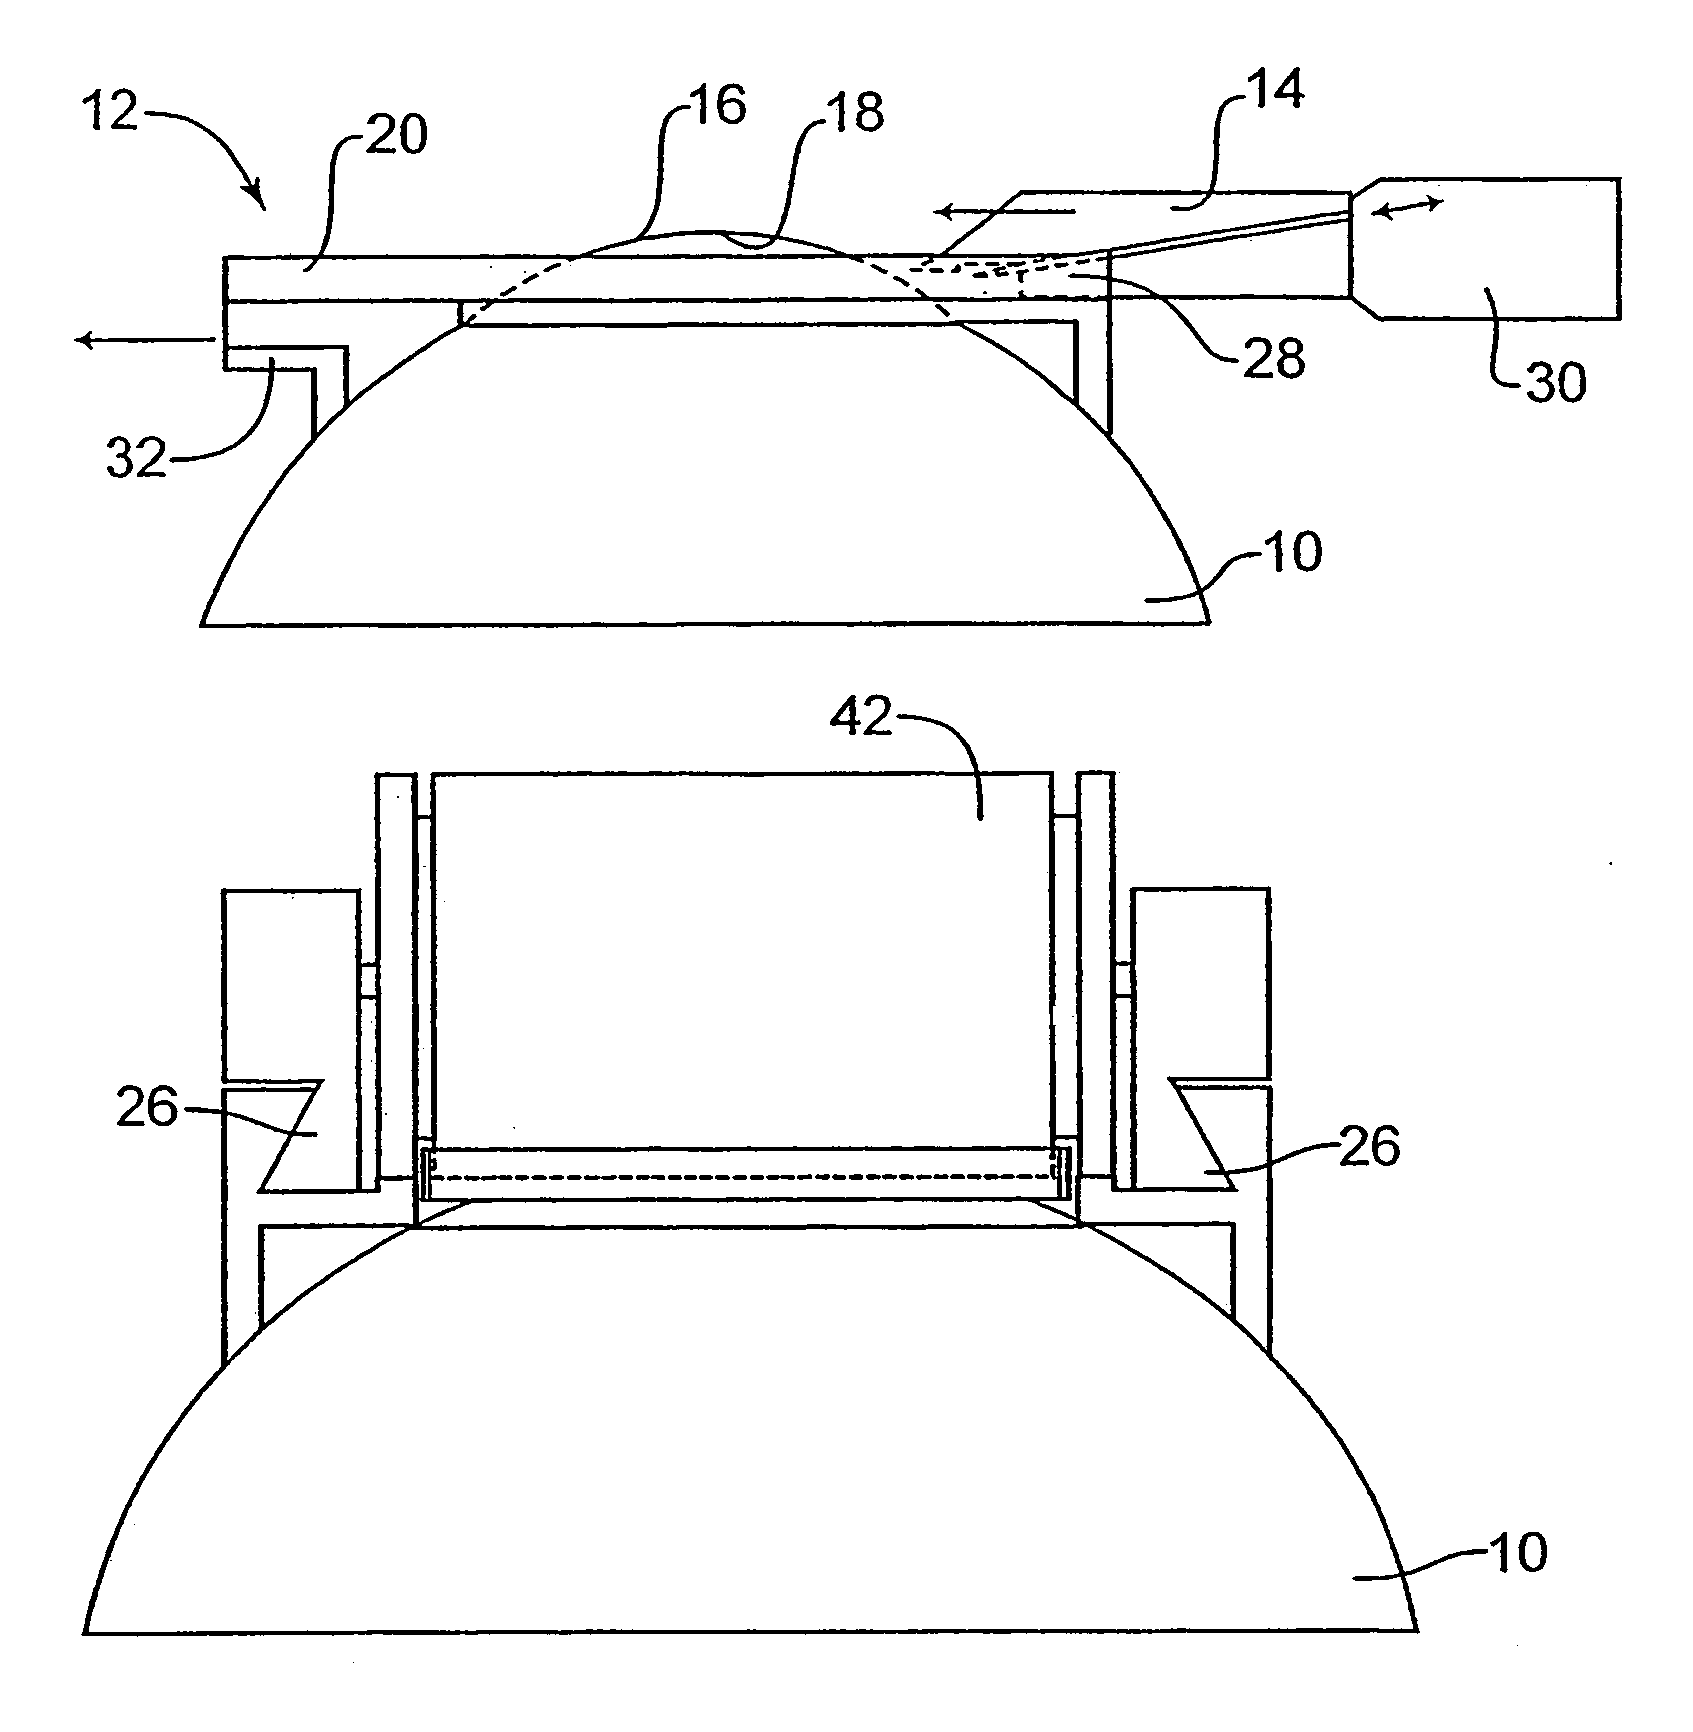 Device for separating the epithelium layer from the surface of the cornea of an eye